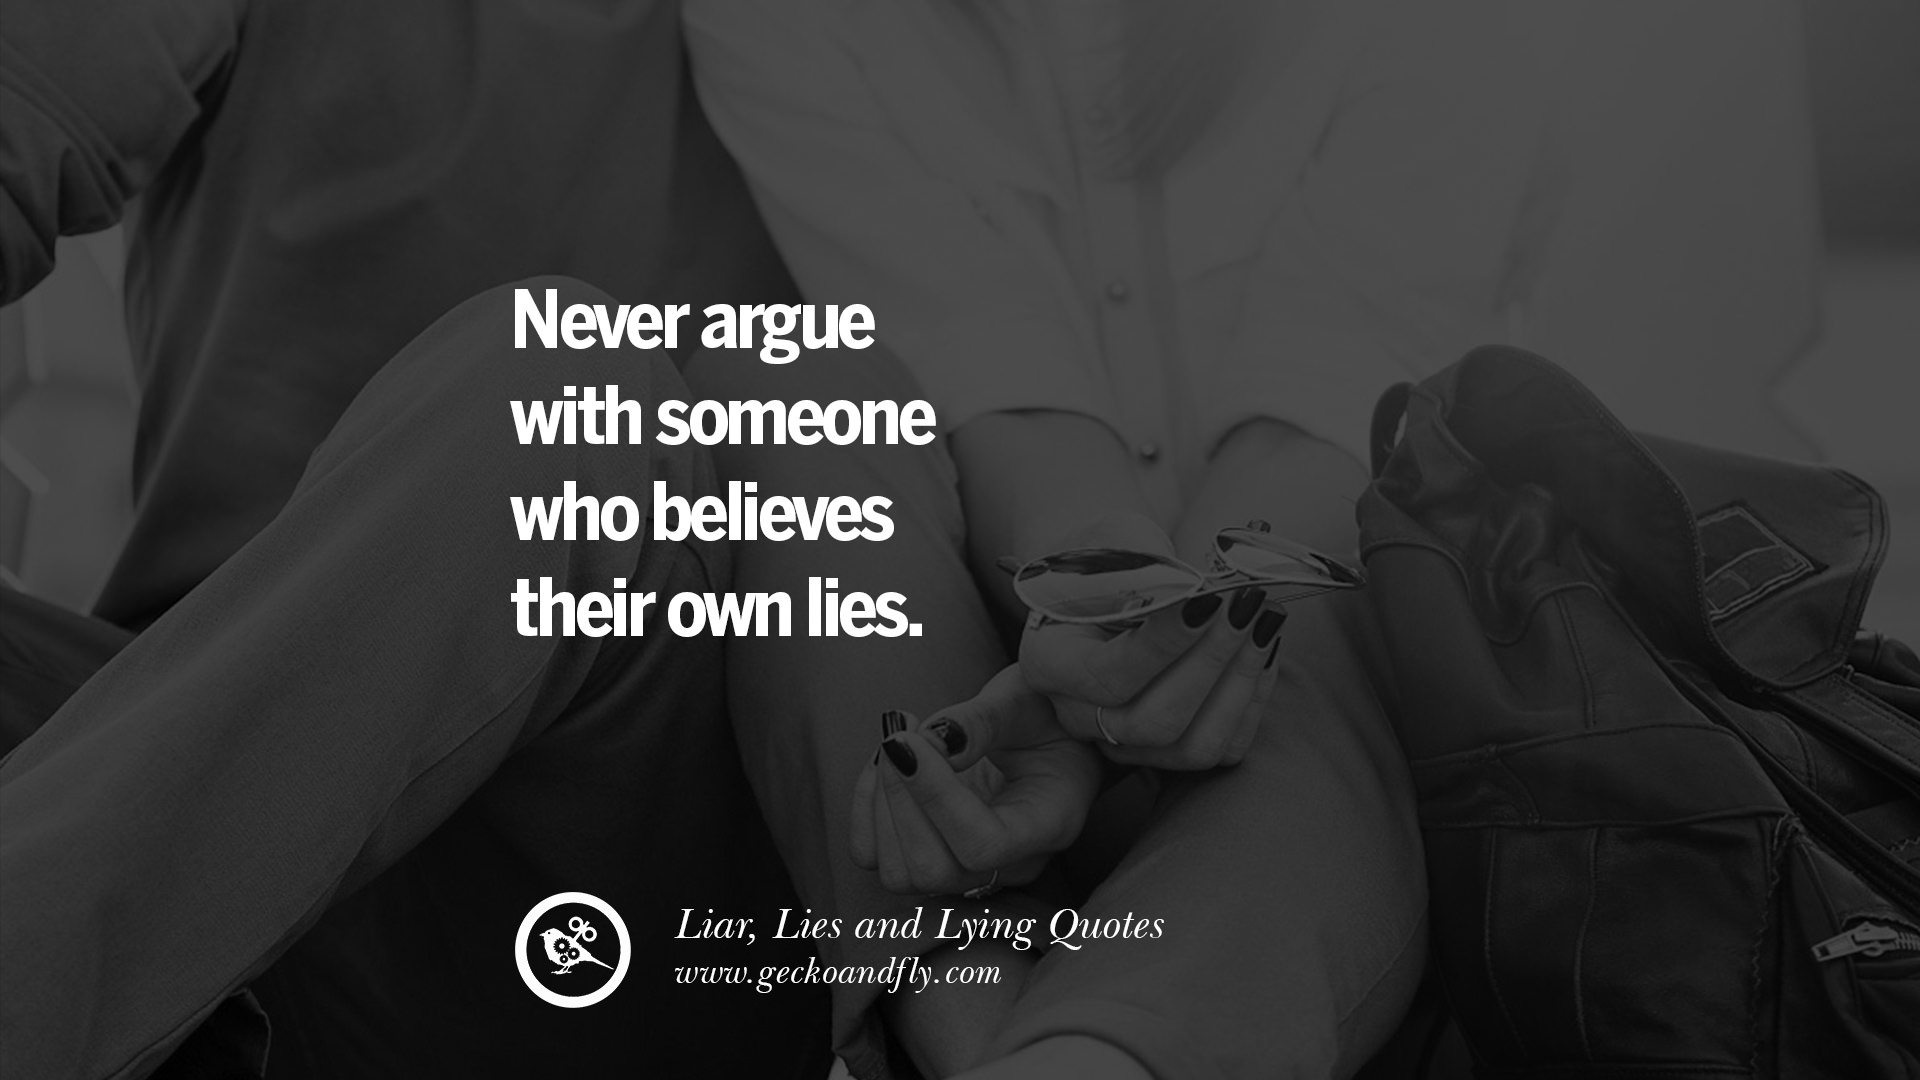 Never argue with someone who believes their own lies